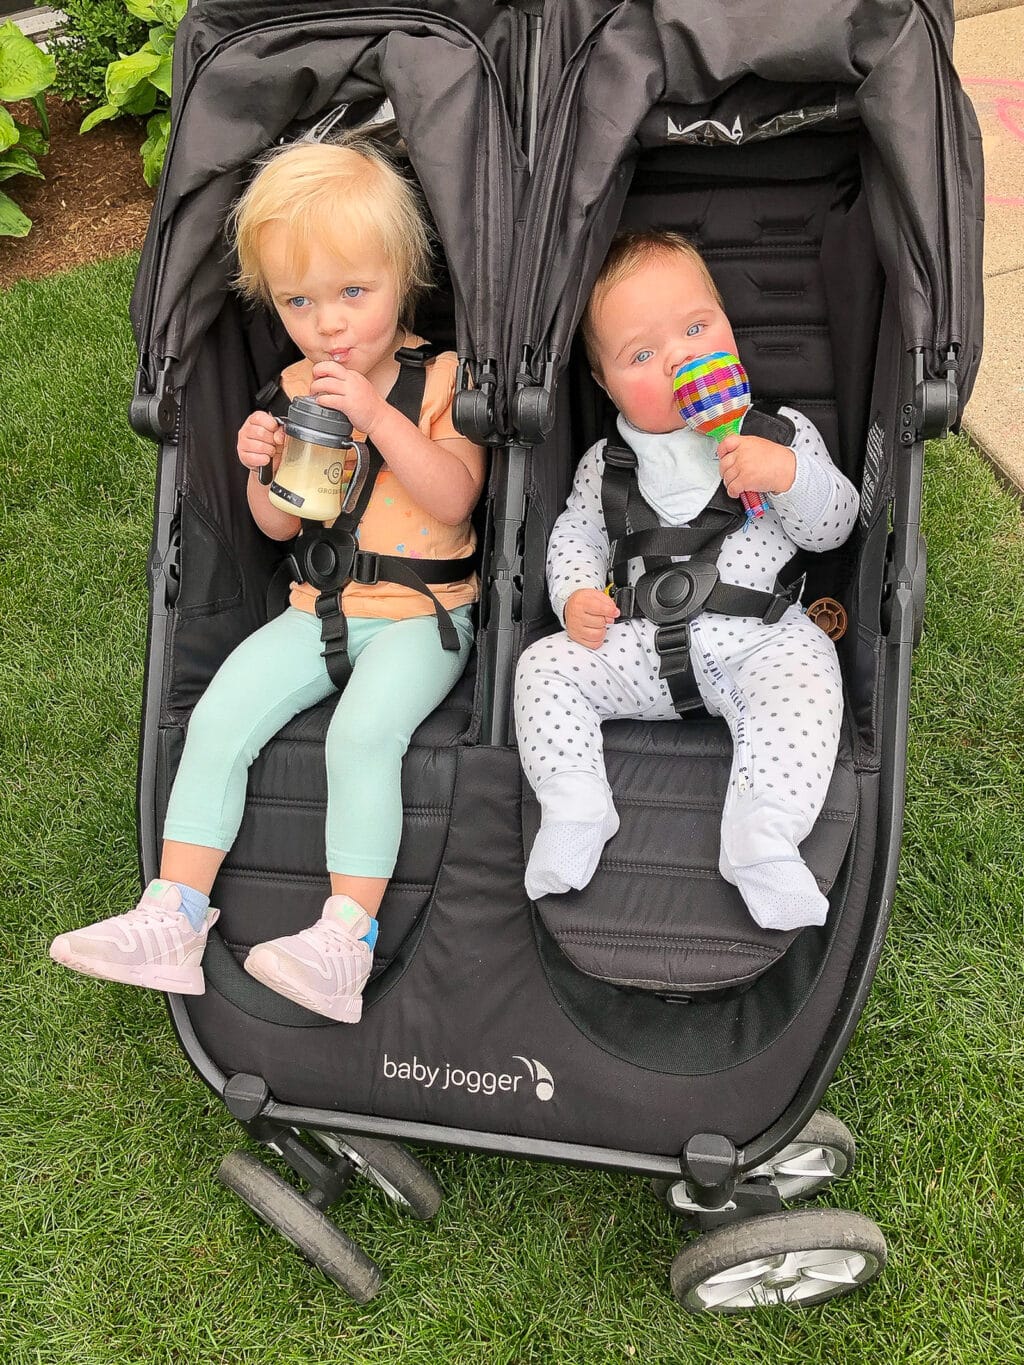 Our double stroller